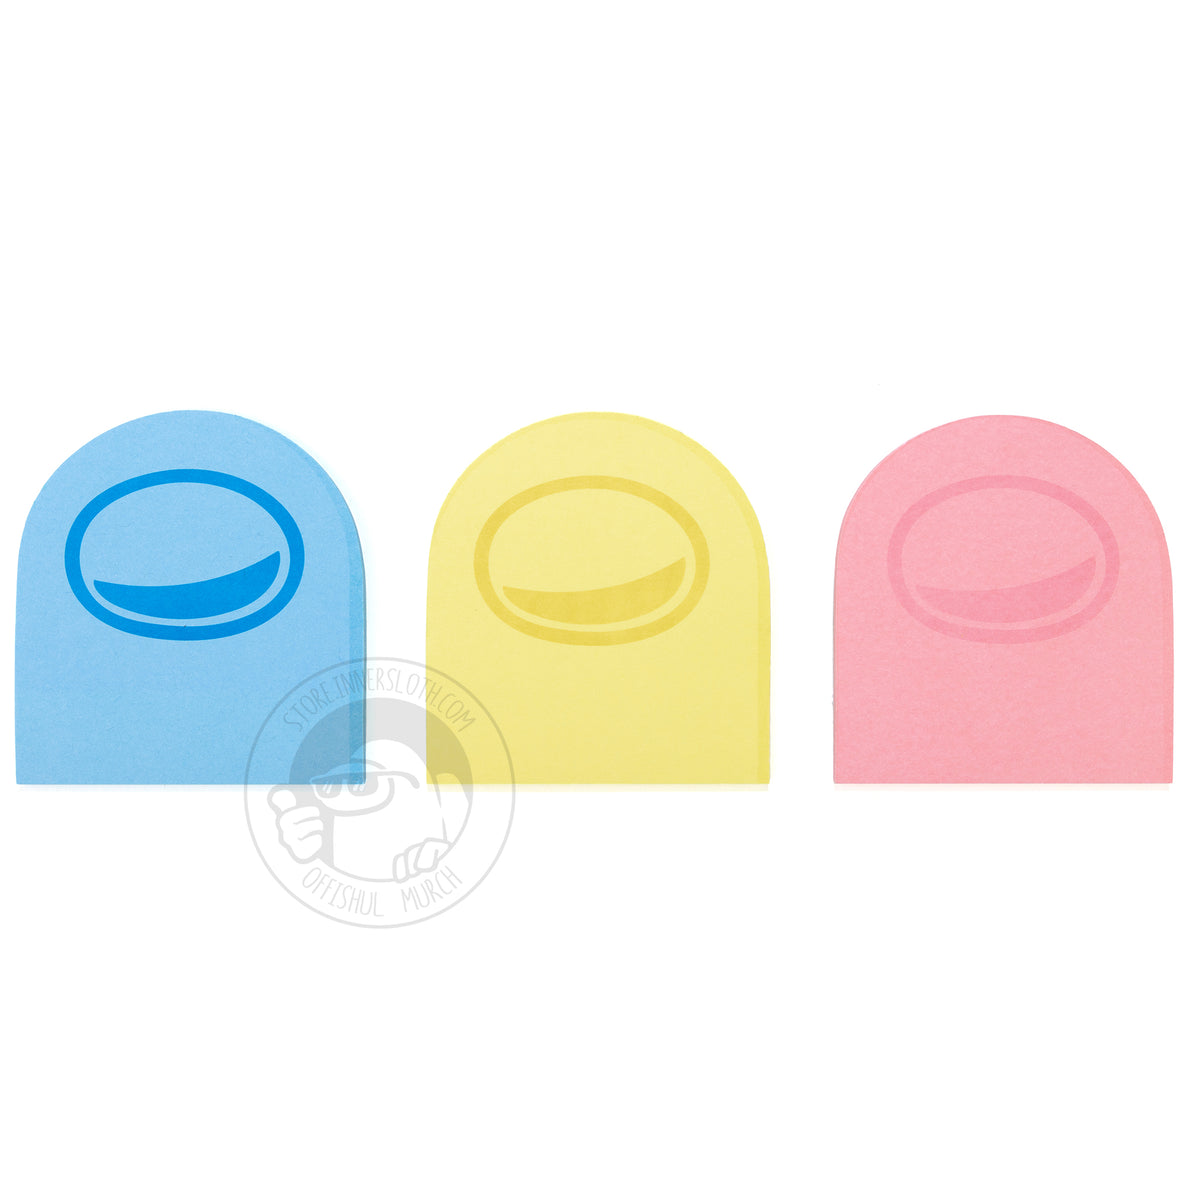 A product photo of each color pack of Post-It notes - blue, yellow, and pink - laying side by side.